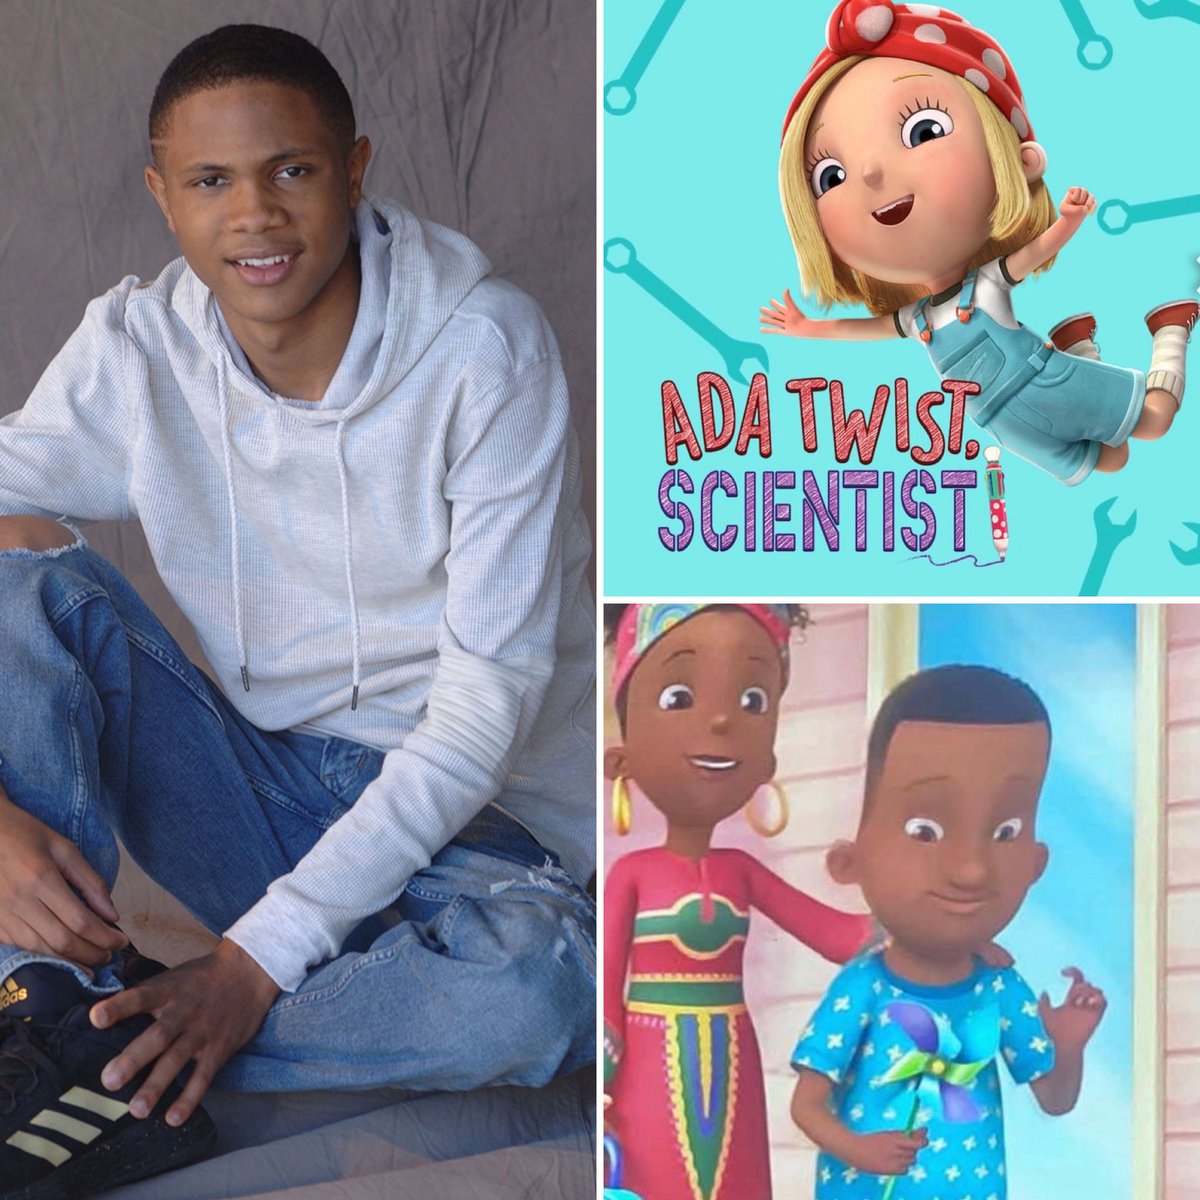 If you are looking for a new kids show to watch, check out Ada Twist, Scientist on Netflix. Justice Killbrew is in the first episode of the new season as Ada’s cousin Nassan. @whatsjsaynow @netflix #zuriinclusion #representionmatters #autismawareness #voiceover